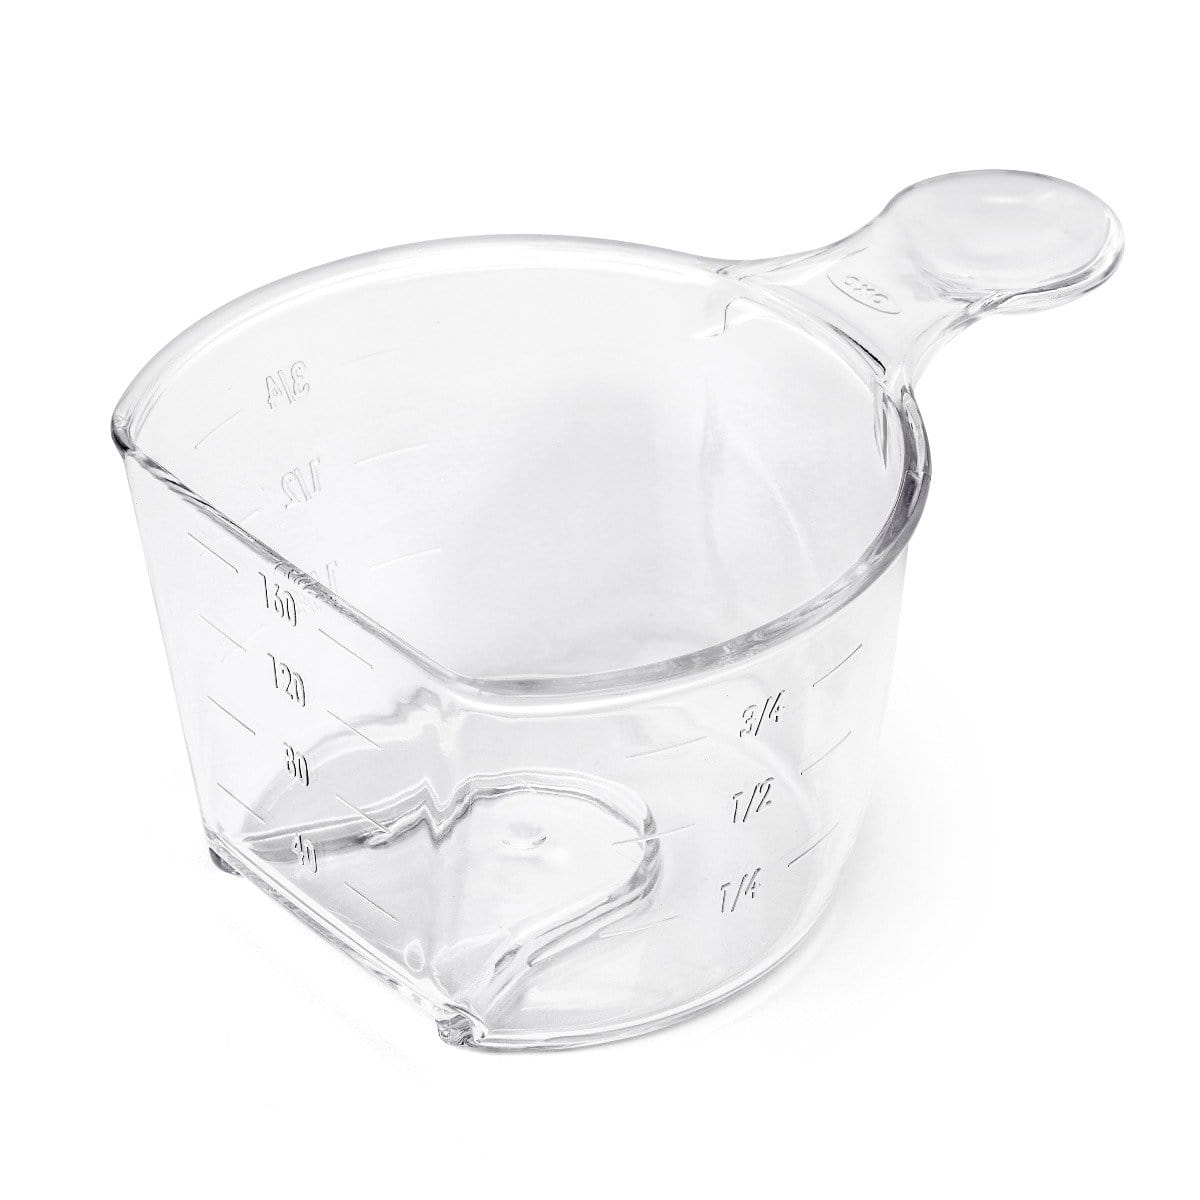 https://cdn.shopify.com/s/files/1/0474/2338/9856/products/oxo-oxo-pop-rice-measuring-cup-719812685663-21049468059808_1600x.jpg?v=1610473736